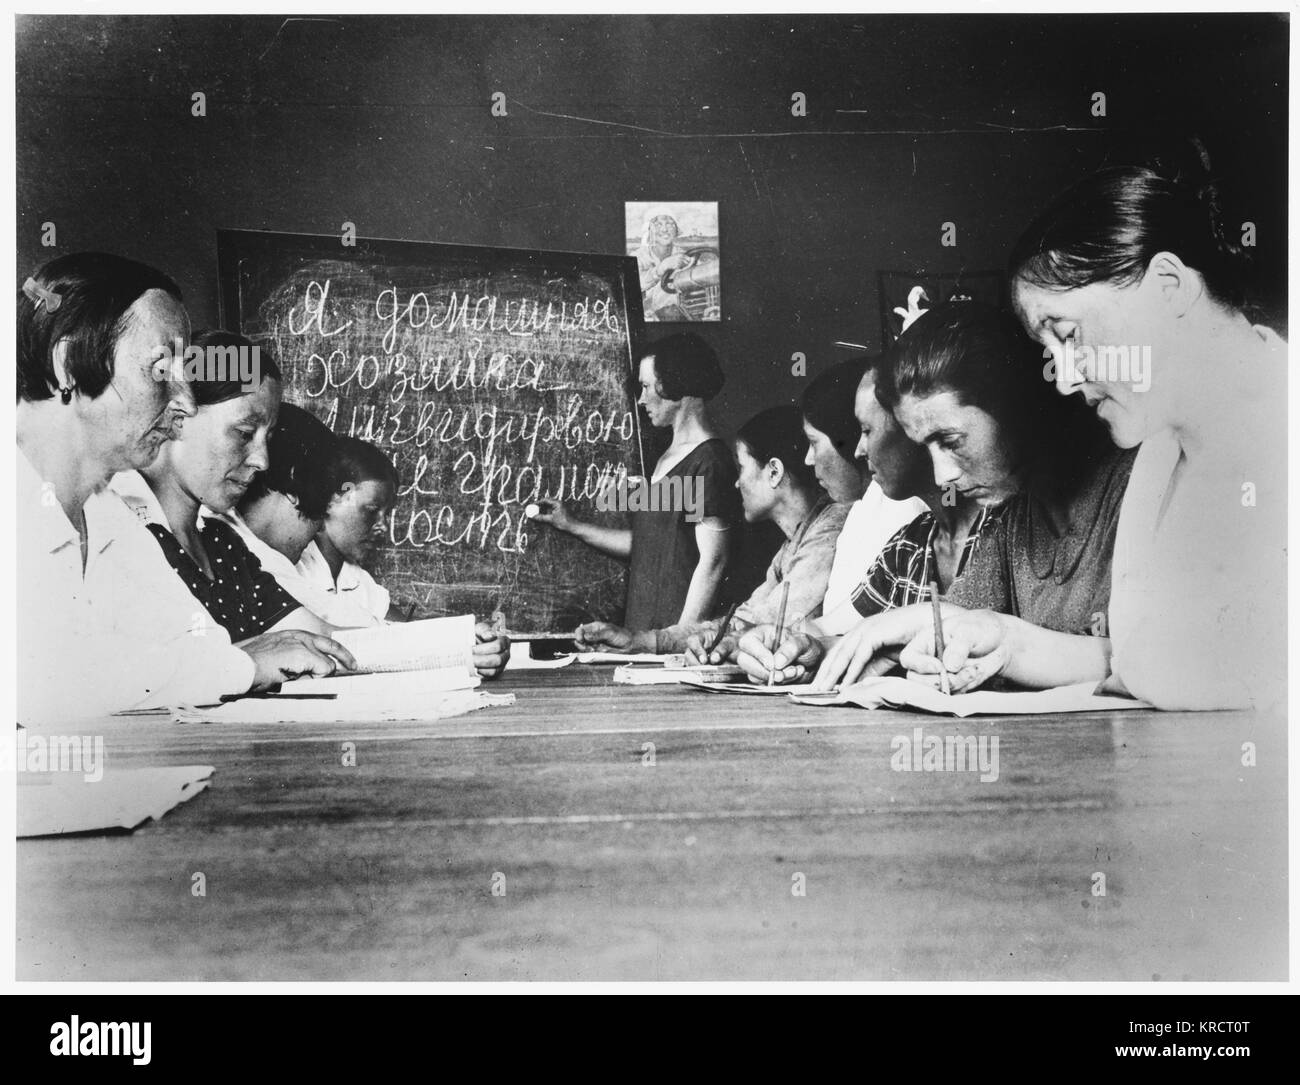 Housewives (inc. Anna Filippova) attend literacy classes ('The Liquidating Illiteracy Circle for Housewives') Date: 1931 Stock Photo